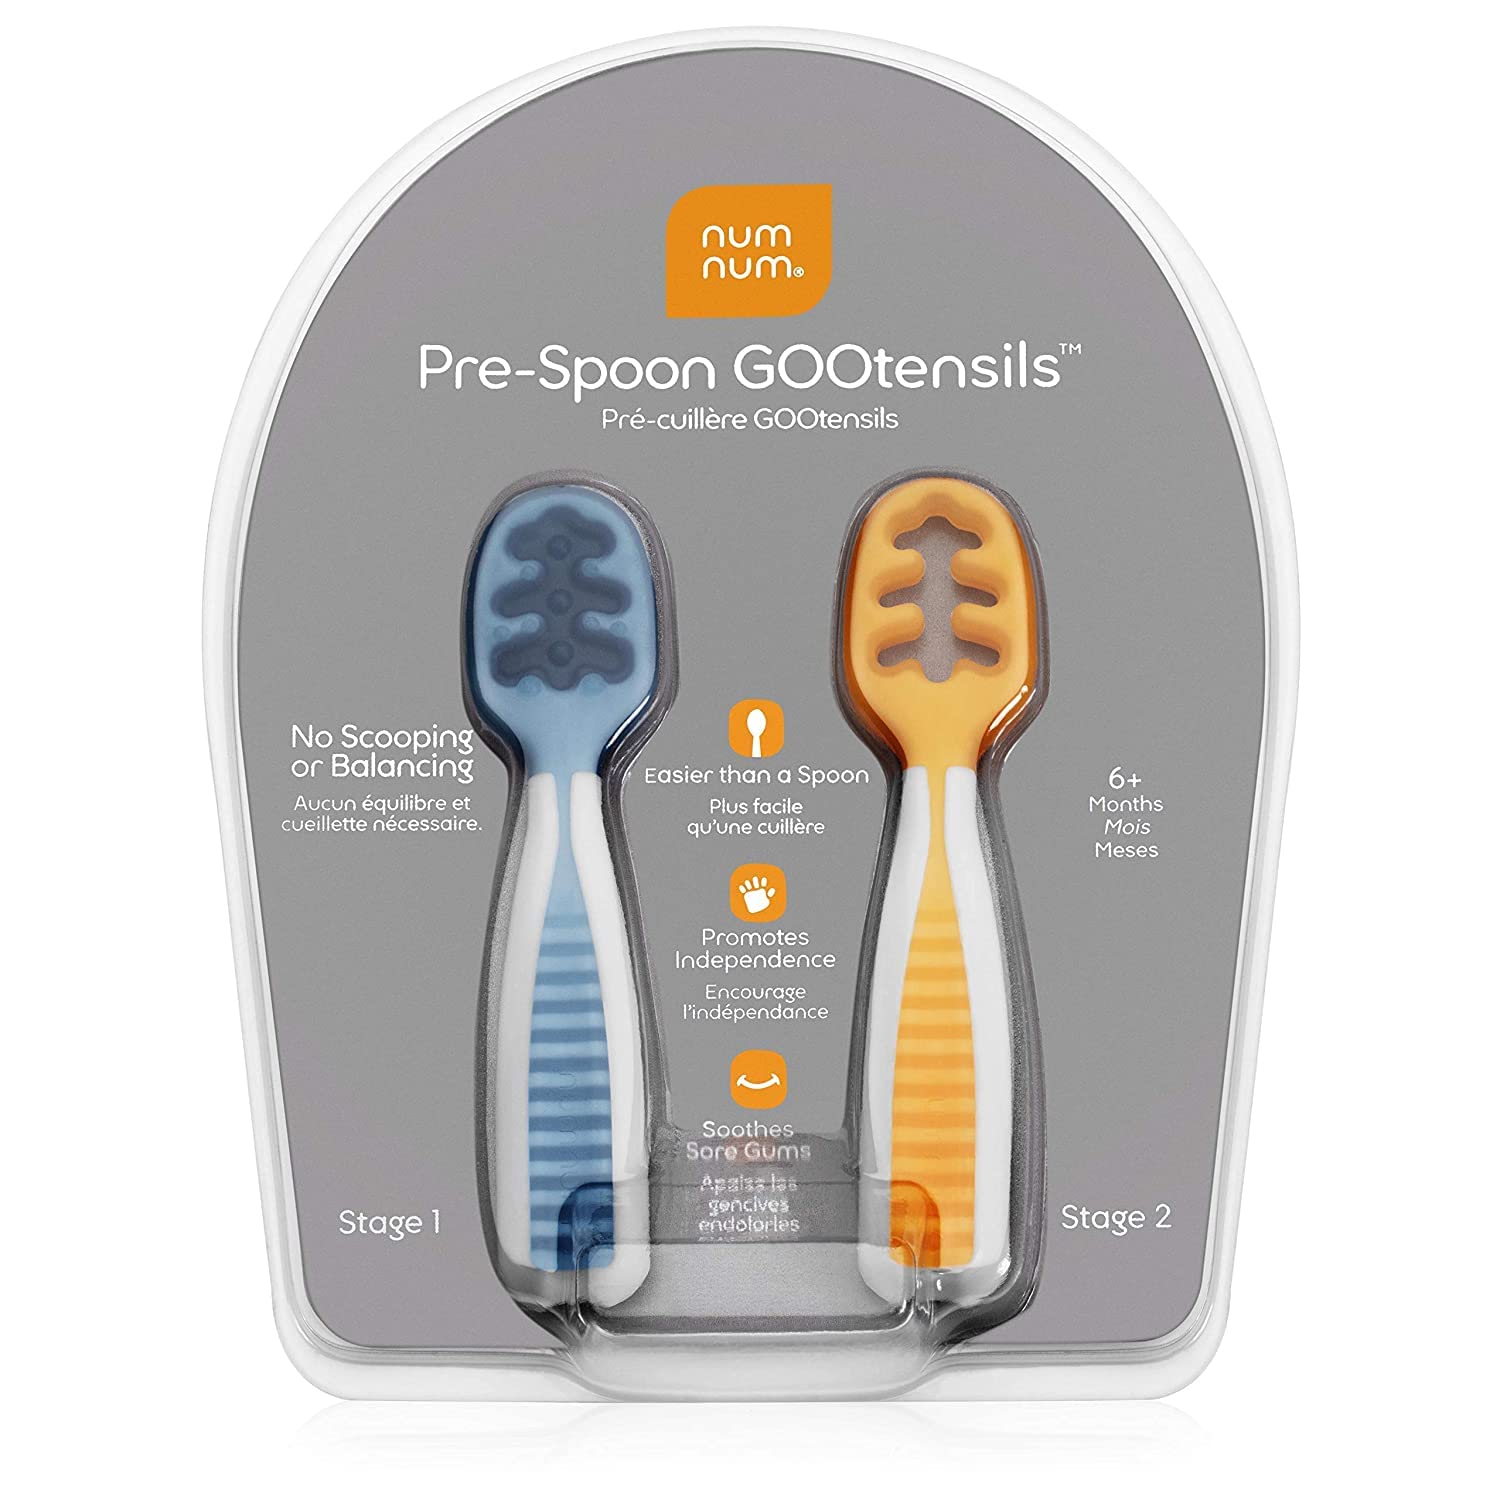 NumNum Baby Spoons Set, Pre-Spoon GOOtensils for Kids Aged 6+ Months - First Stage, Baby Led Weaning (BLW) Teething Spoon - Self Feeding, Silicone Toddler Food Utensils - 2 Spoons, Blue/Orange